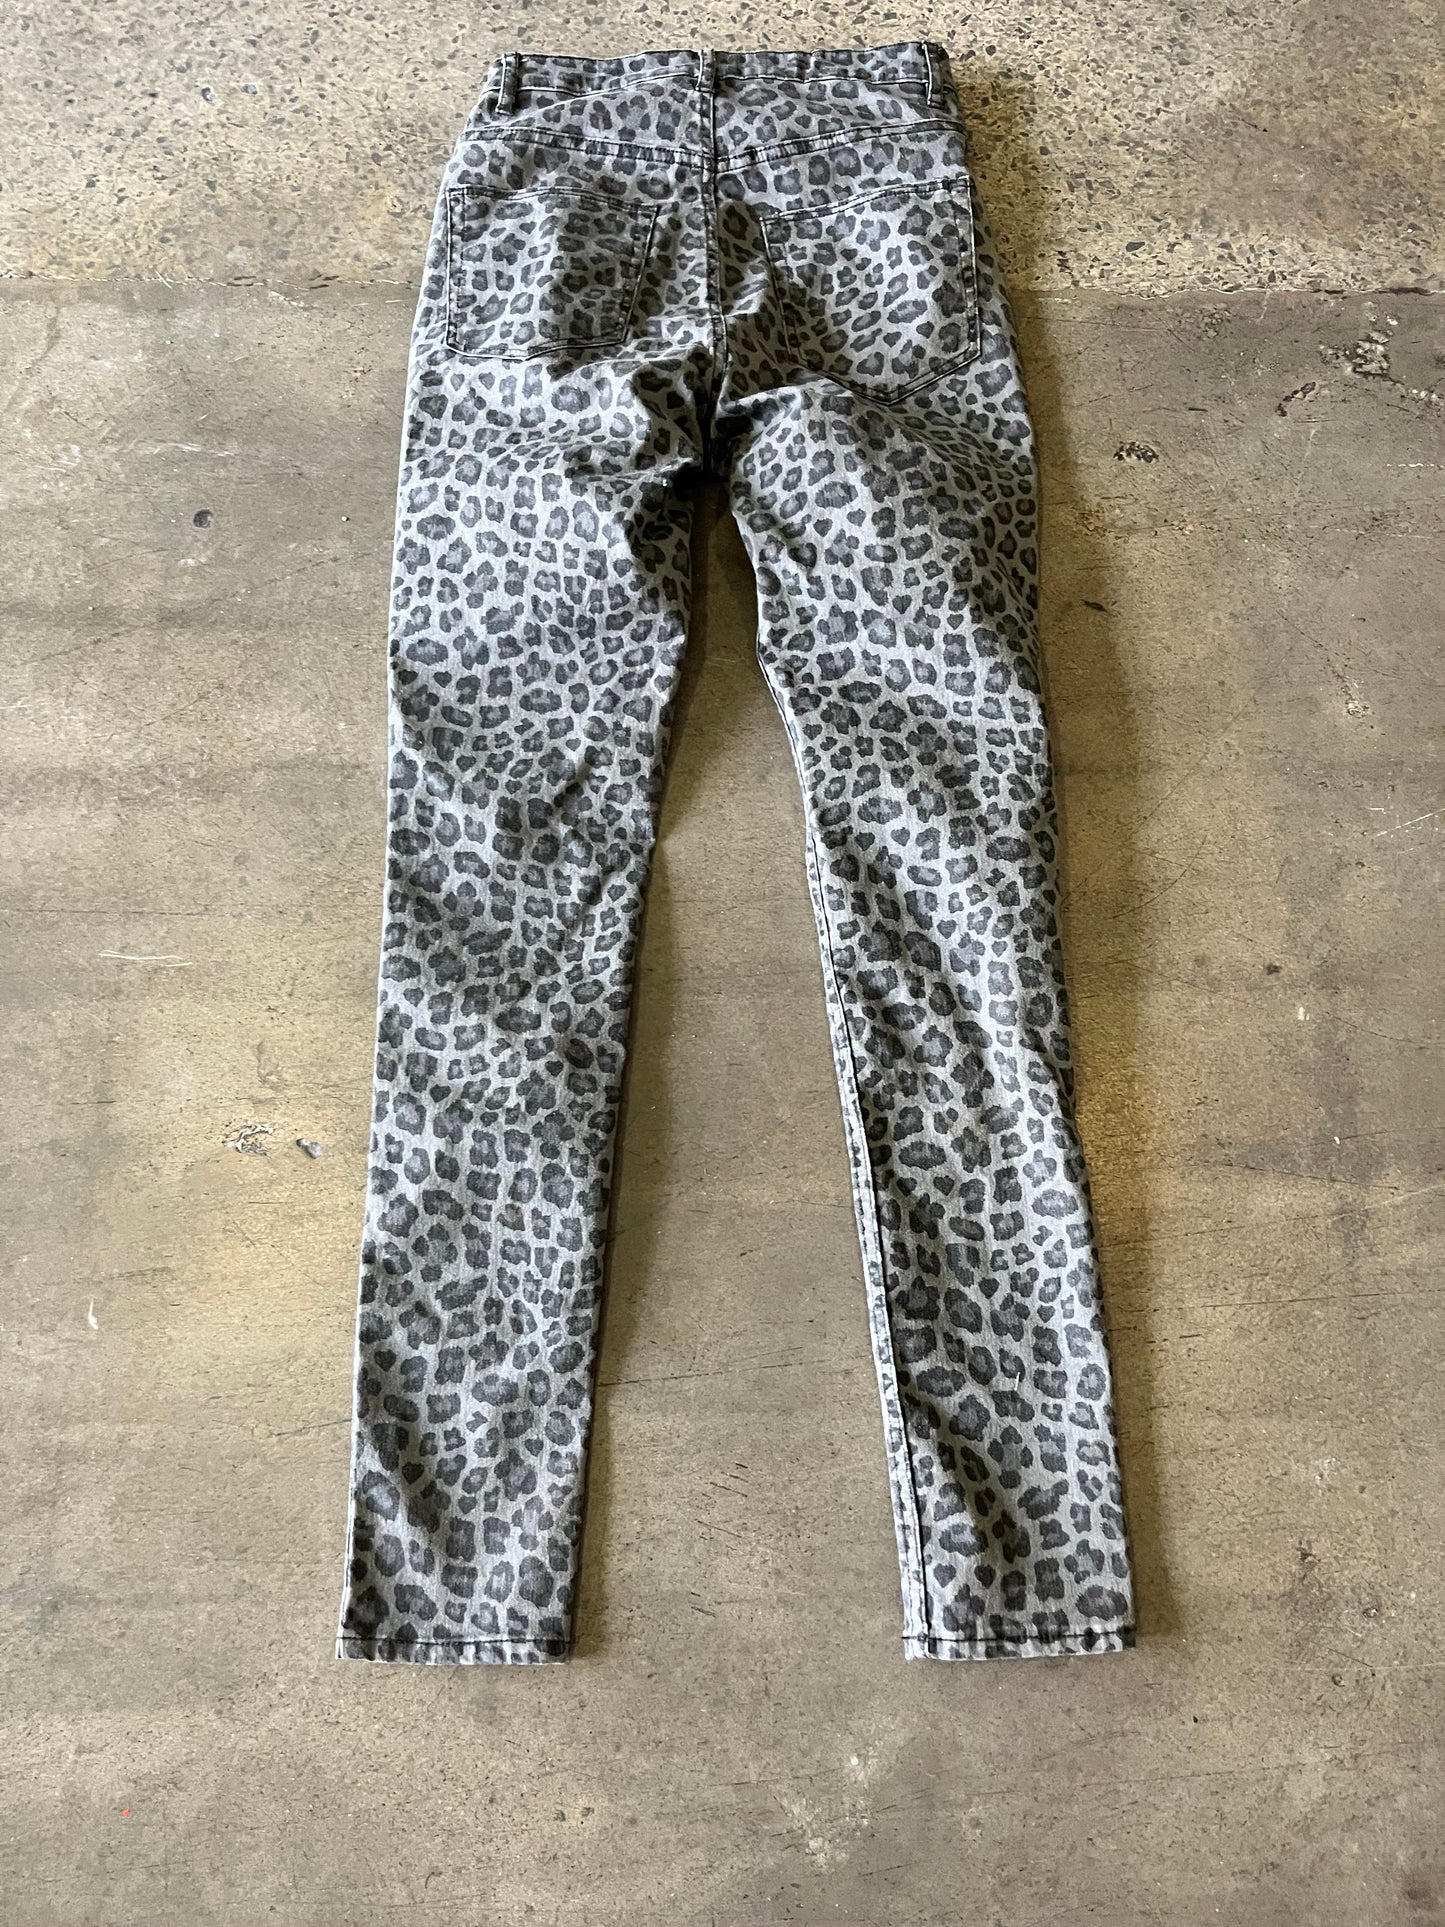 SONS OF ANARCHY: Wendy's Leopard Print Pants (6)